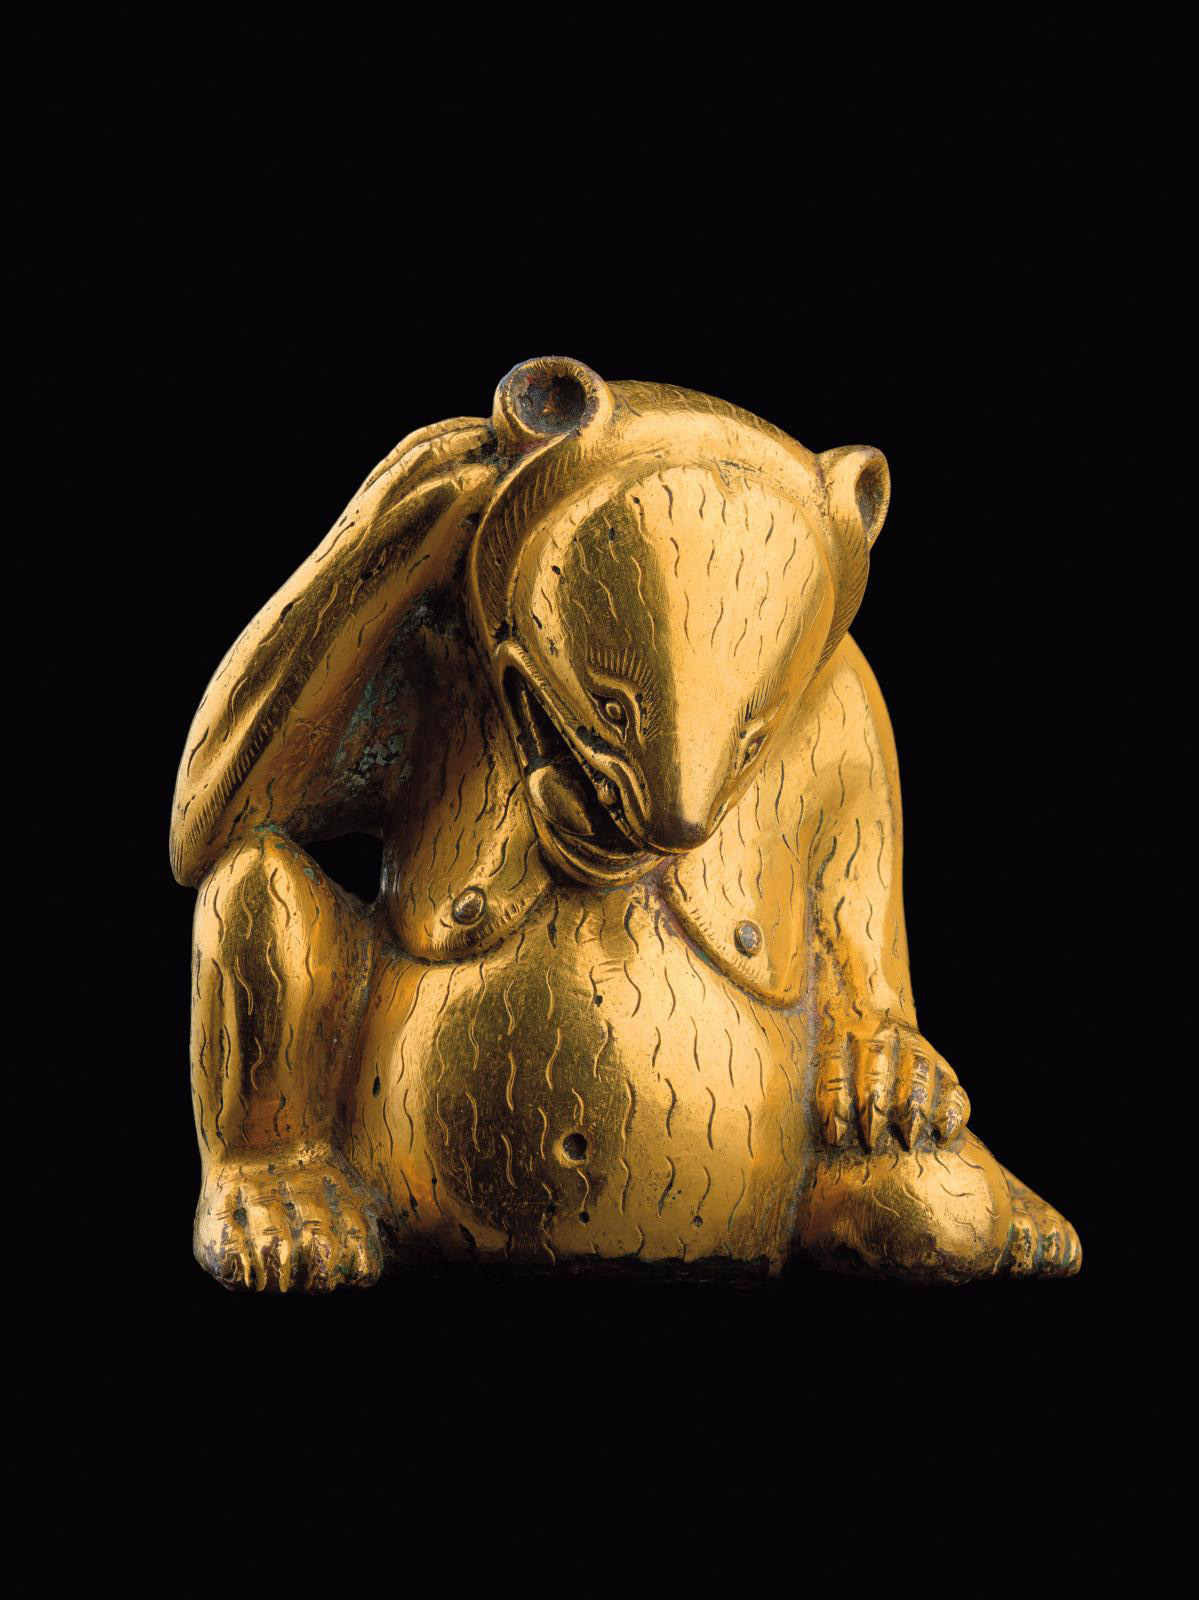 Gilt bronze bear. China, Western Han Dynasty, 206 BC-23 AD.Photo: Todd-White Art Photography - Al Thani Collection - All rights reserved